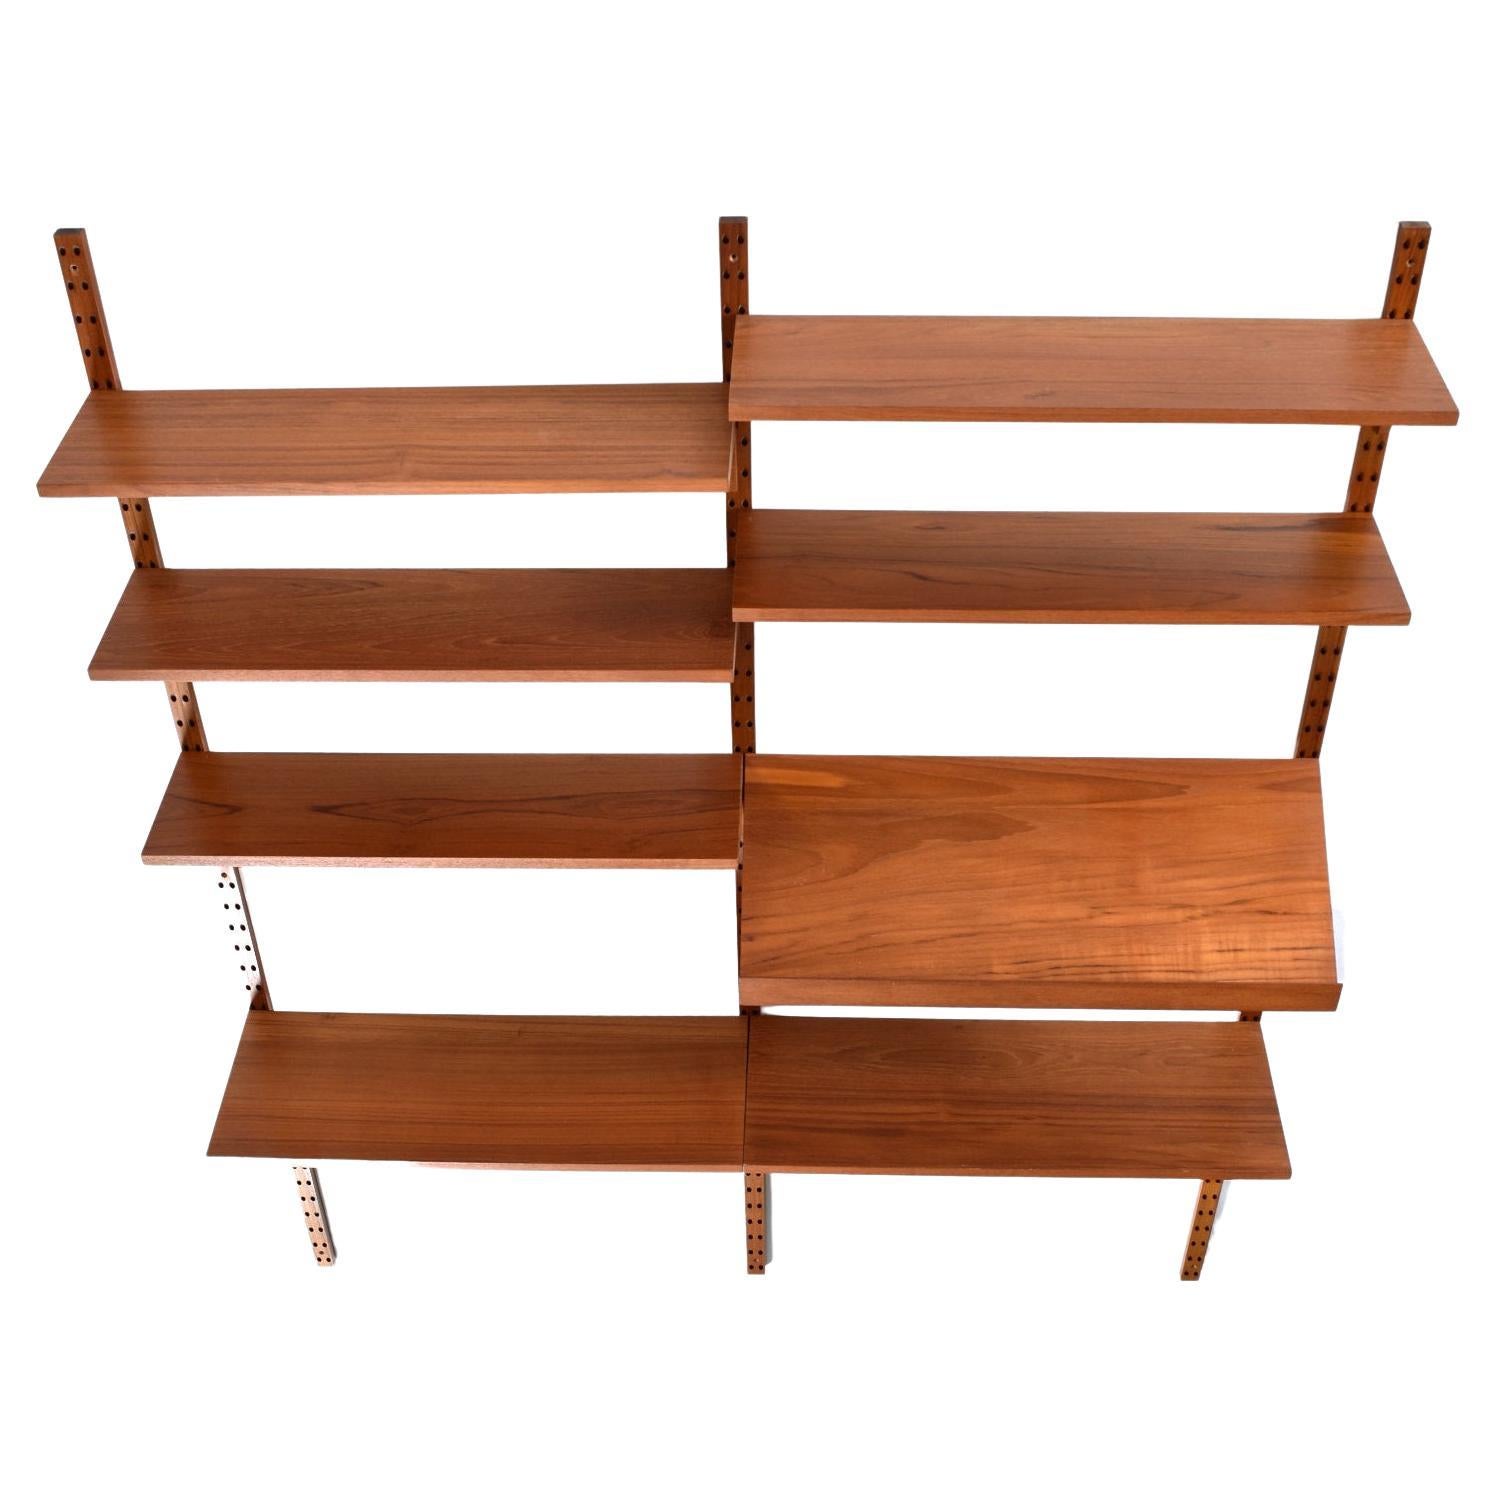 Two-bay Danish teak wall mounted shelving system designed by Poul Cadovius. Vintage 1960s, the CADO’s modular shelving system remains an everlasting icon. The ingenious design allows one to easily customize the height, position and amount of